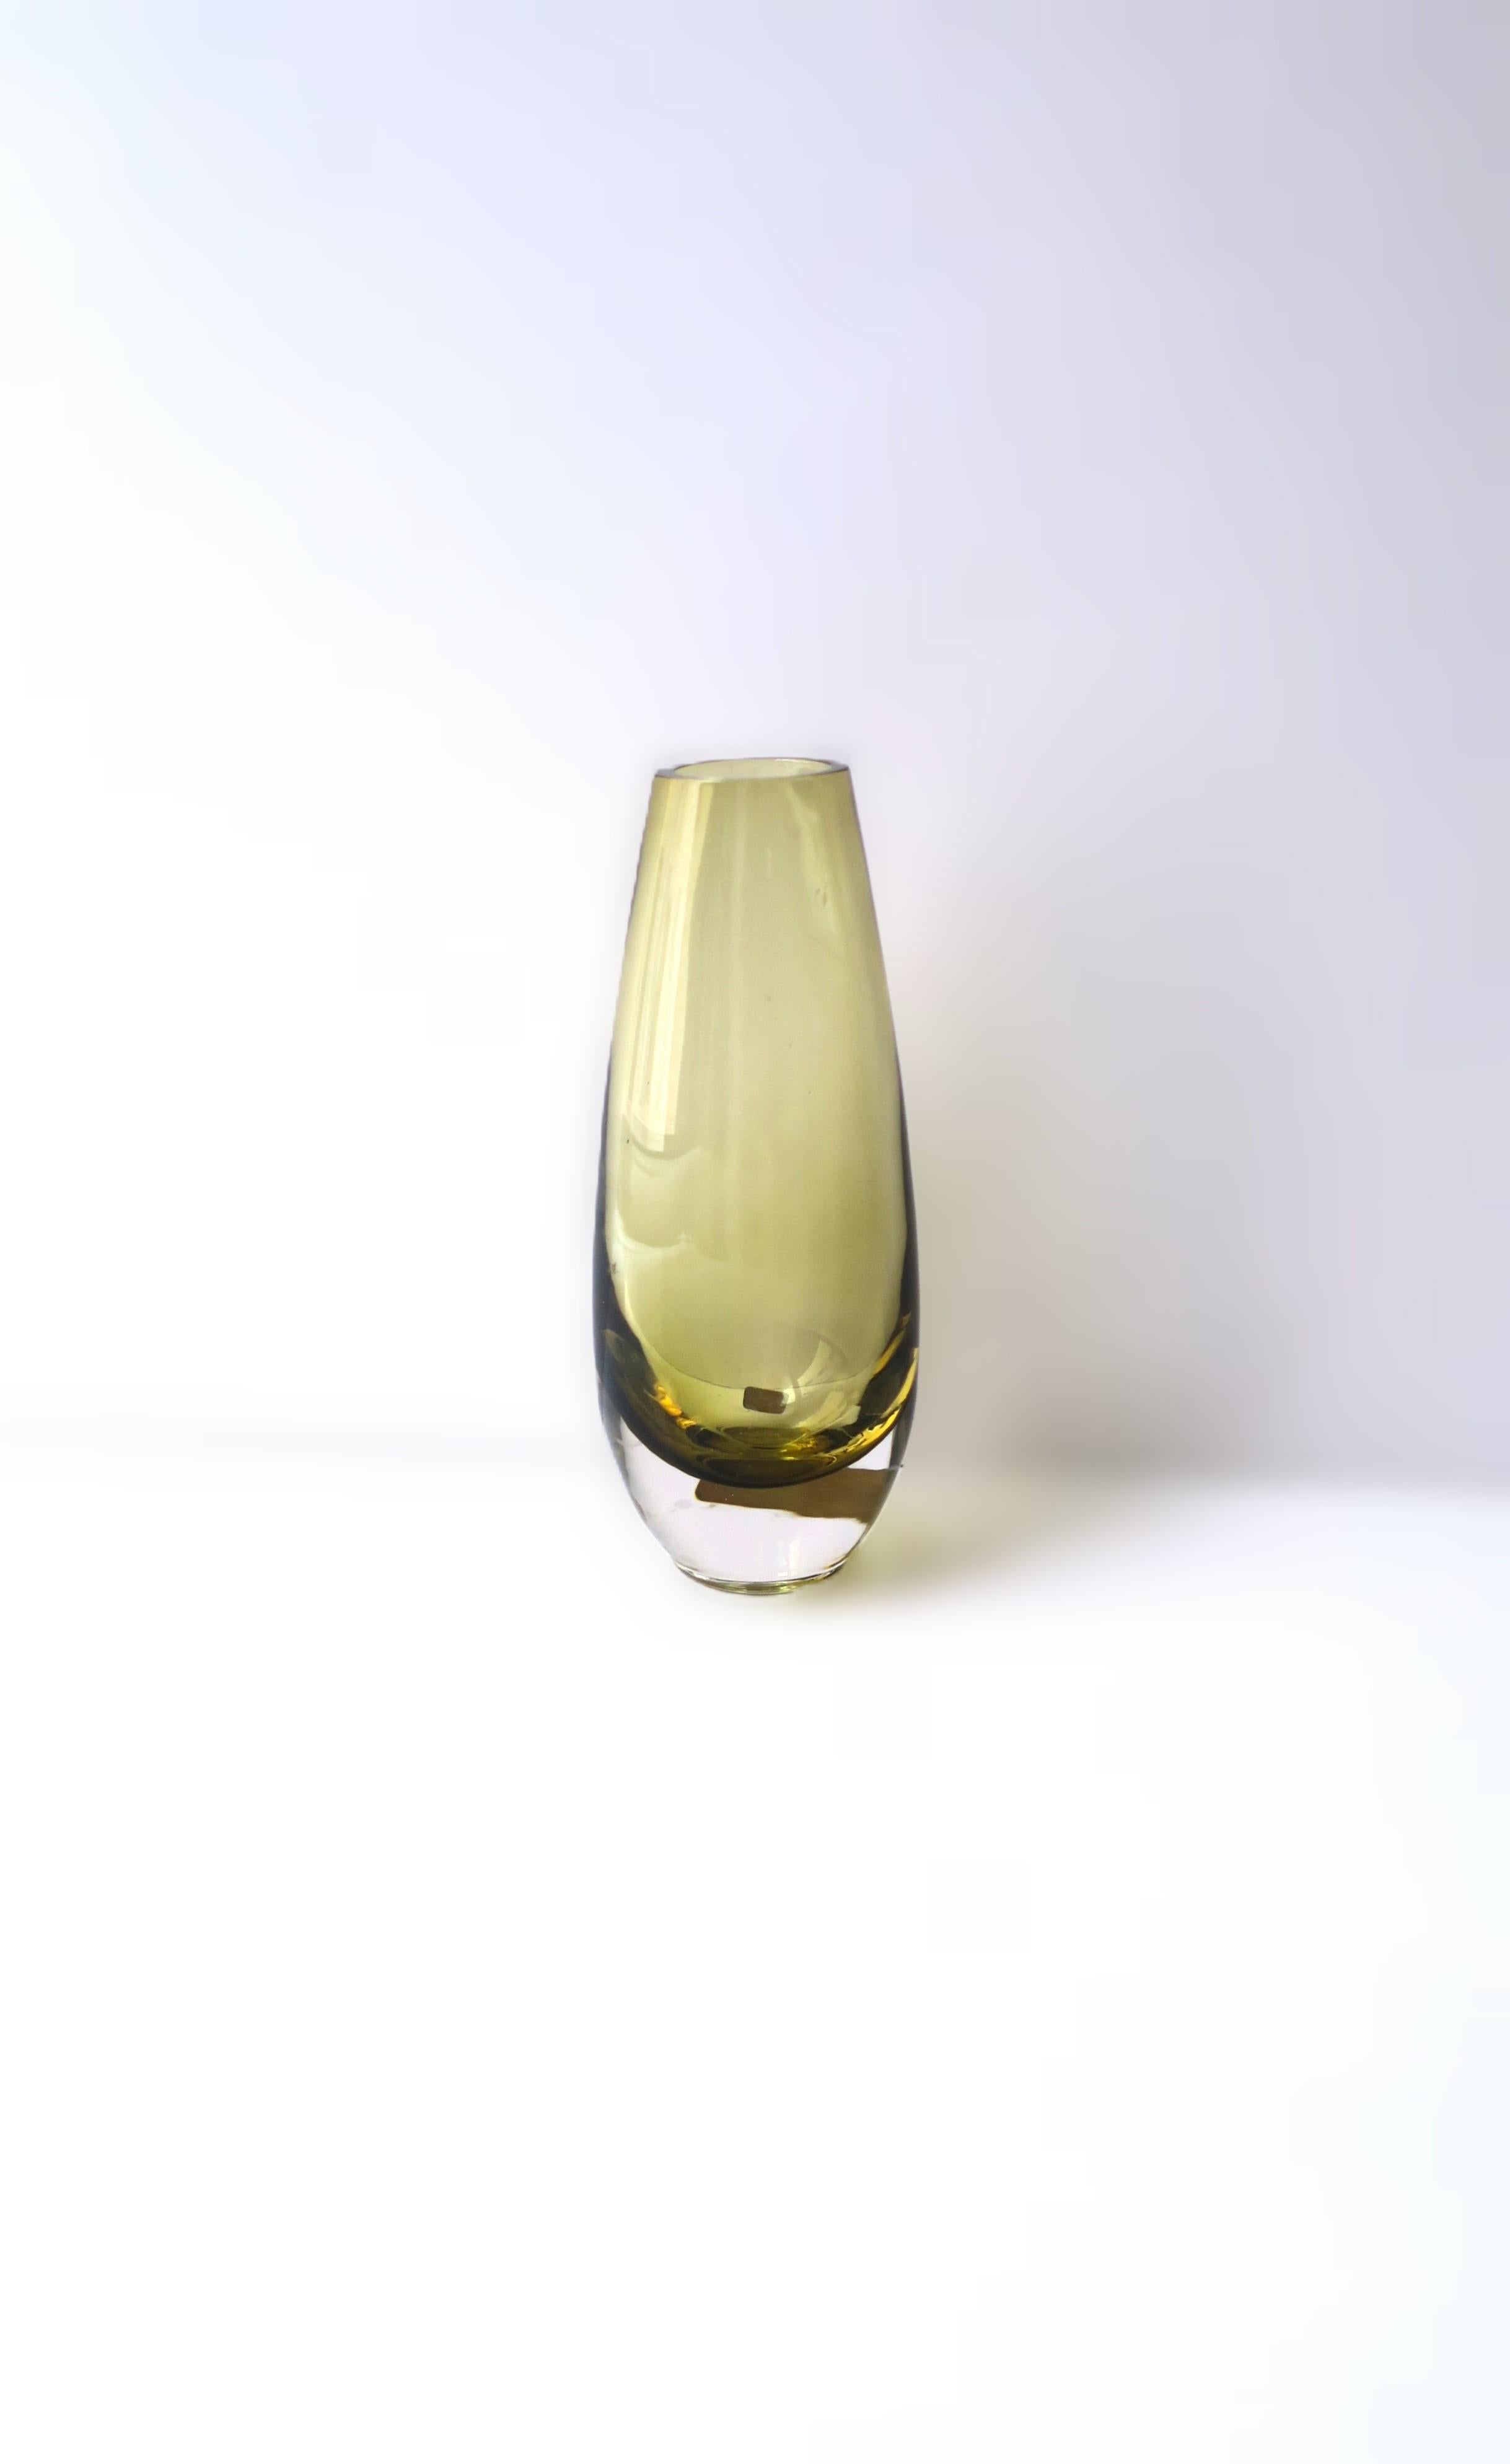 A Swedish light-yellow glass vase, Midcentury Modern Scandinavian Modern, Sweden, circa mid-20th century. Very good condition as shown in images and video. Markers' mark as shown in image. A great piece for a desk, table, shelf, etc. Measures: 7.25